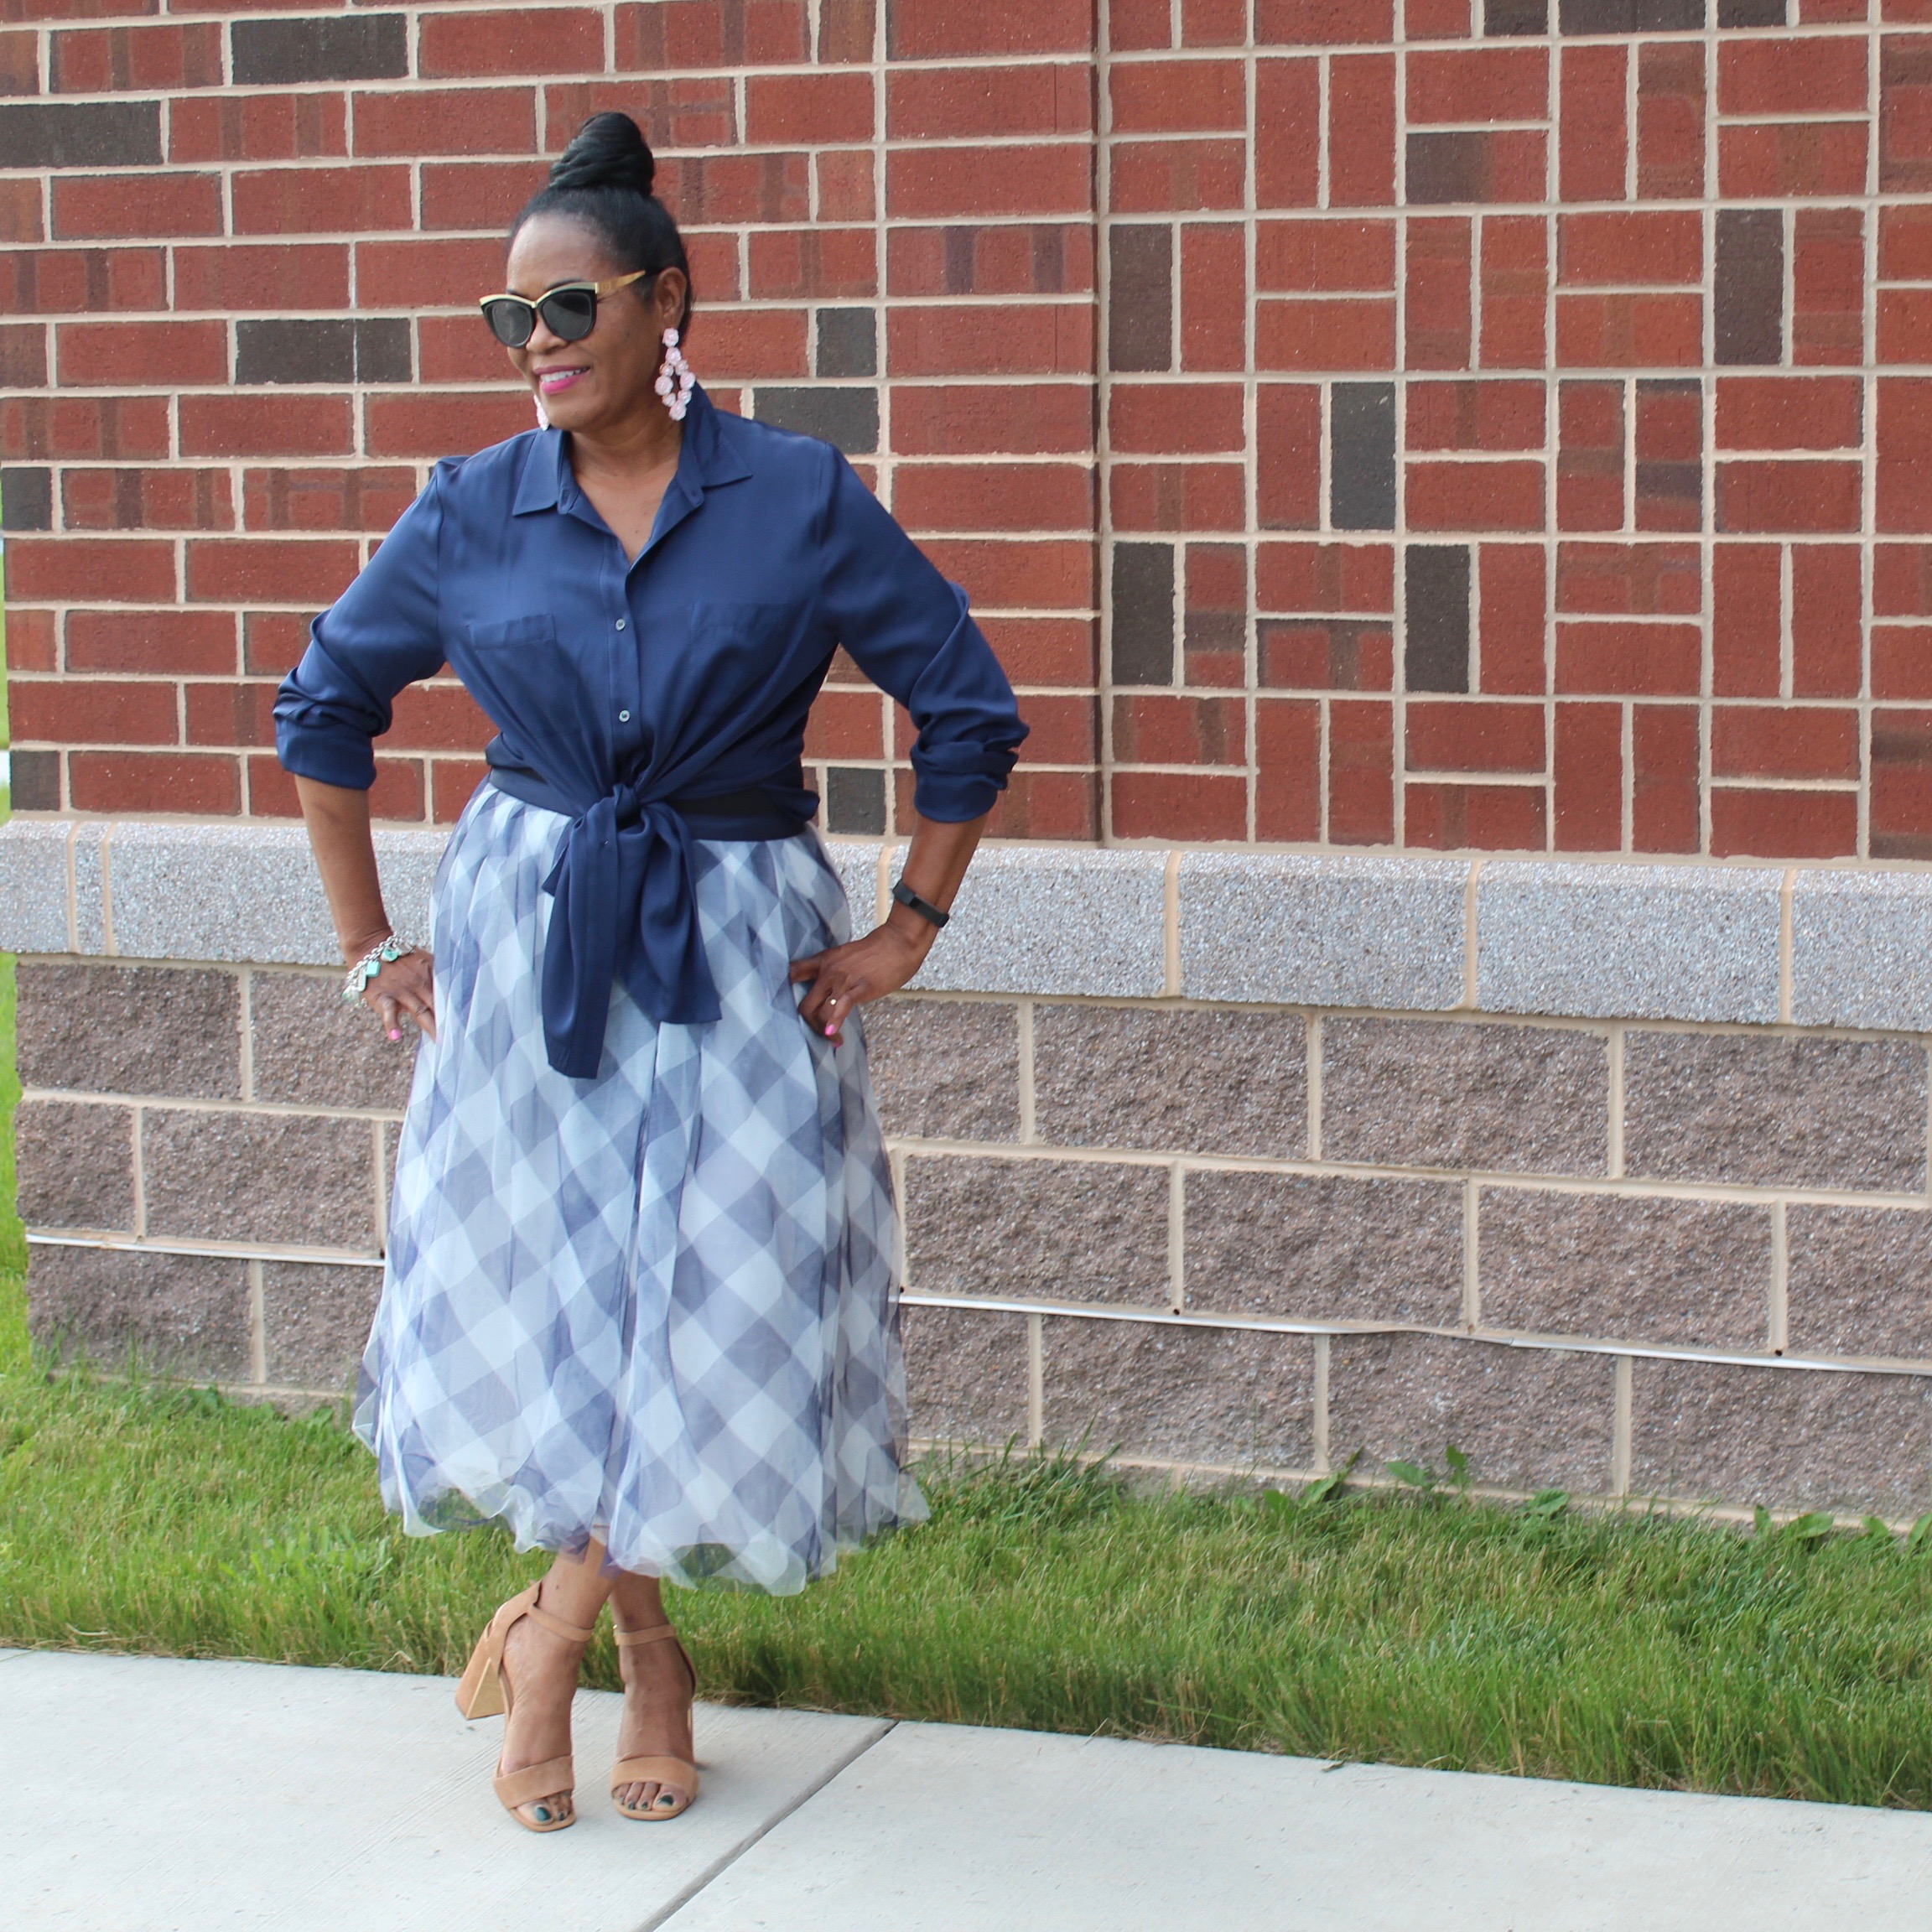 J. Crew Tulle Skirt with Repeat Navy Silk Blouse